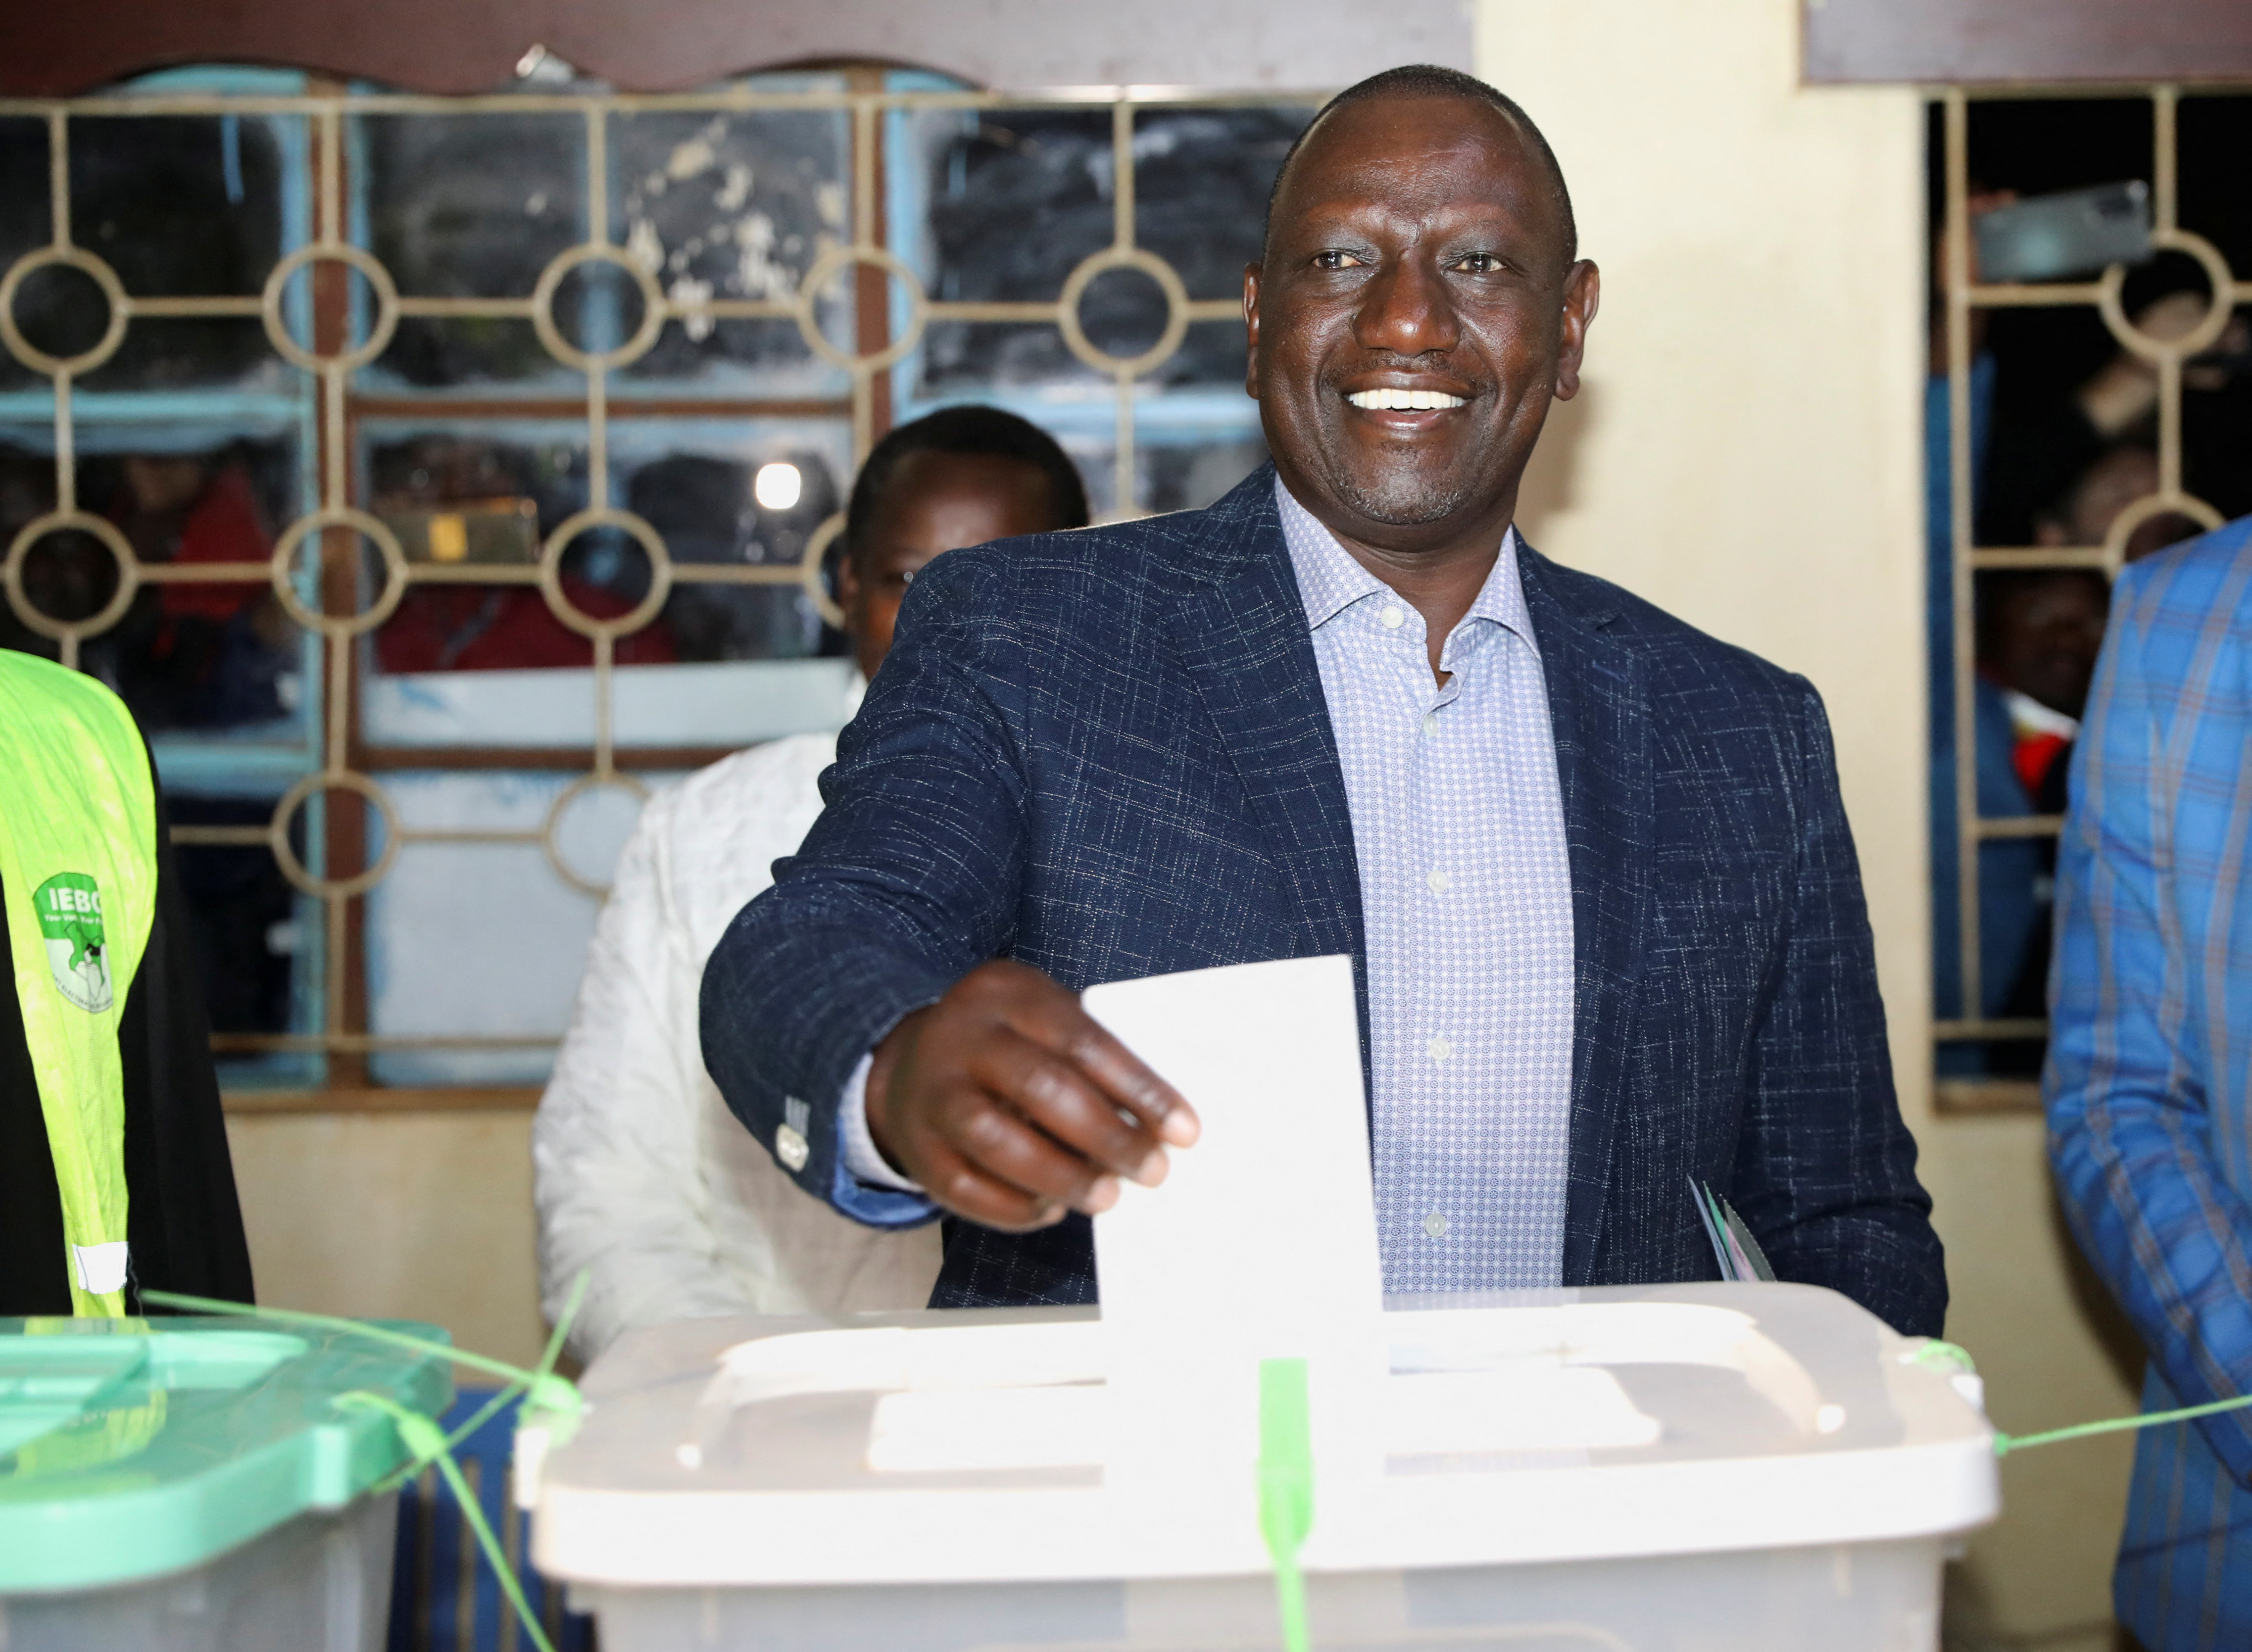 Kenya's presidential candidate William Ruto casts his vote during the general elections, at Kosachei Primary School